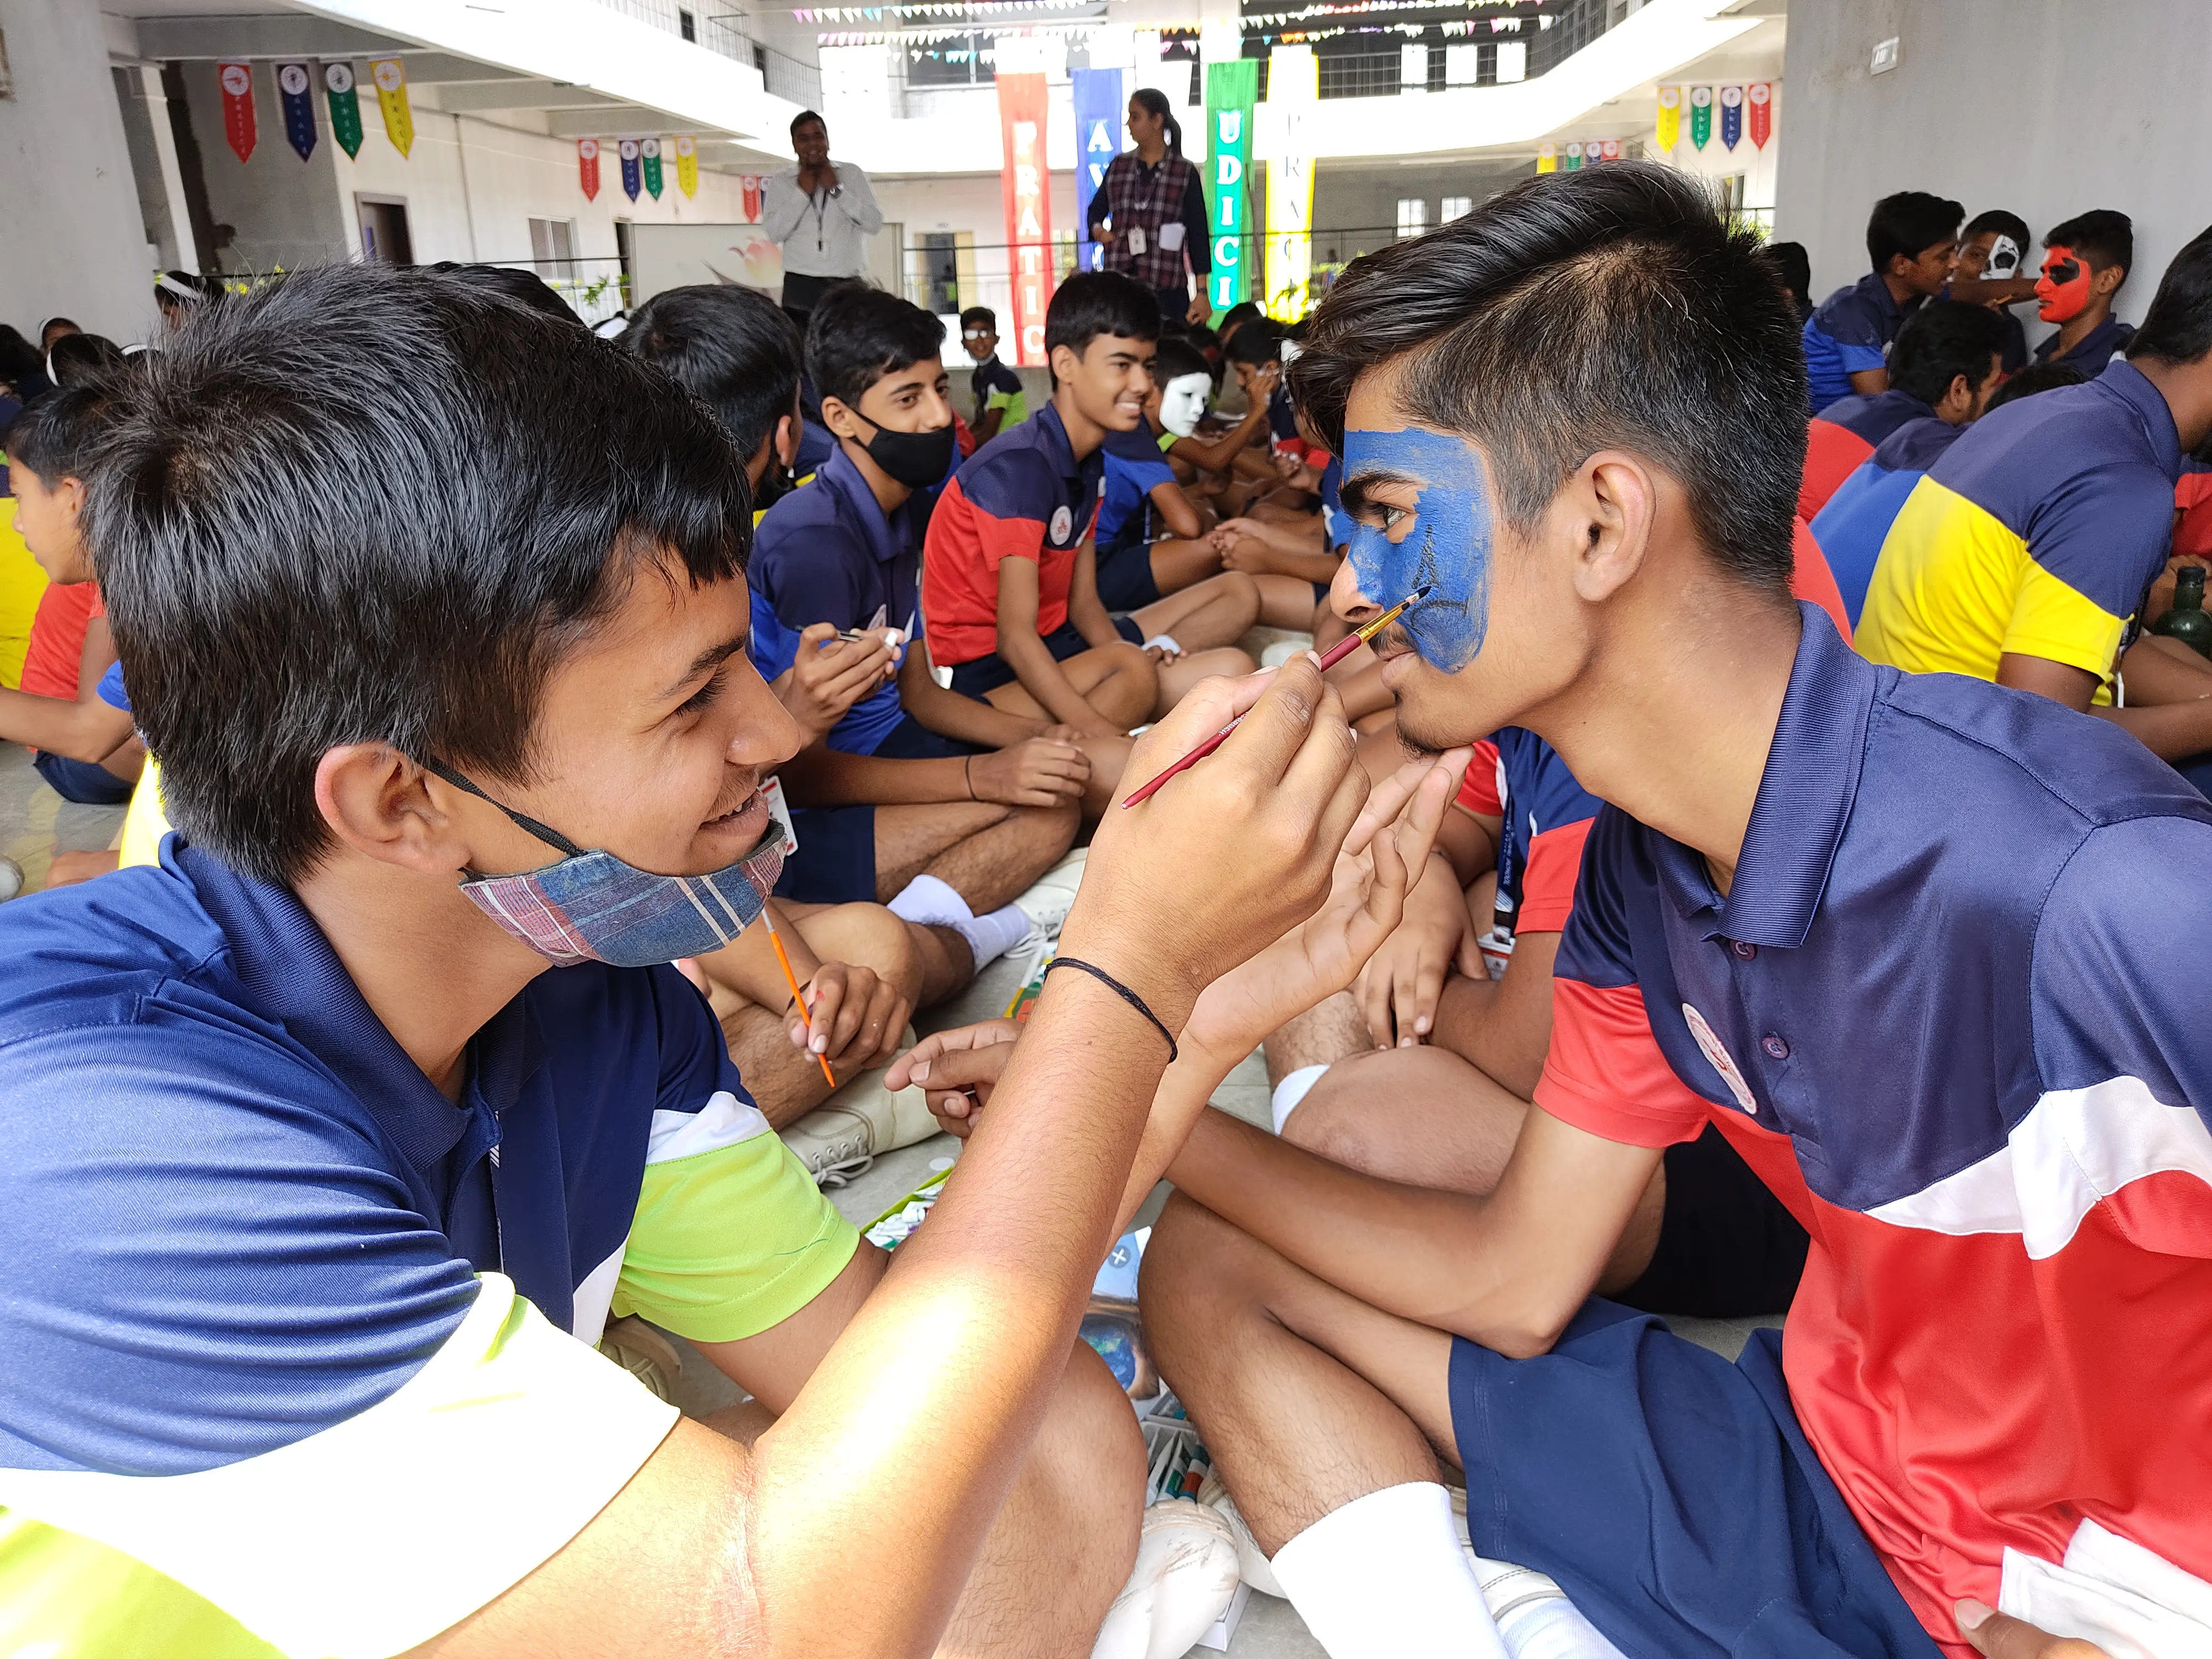 FACE PAINTING COMPETITION 2021